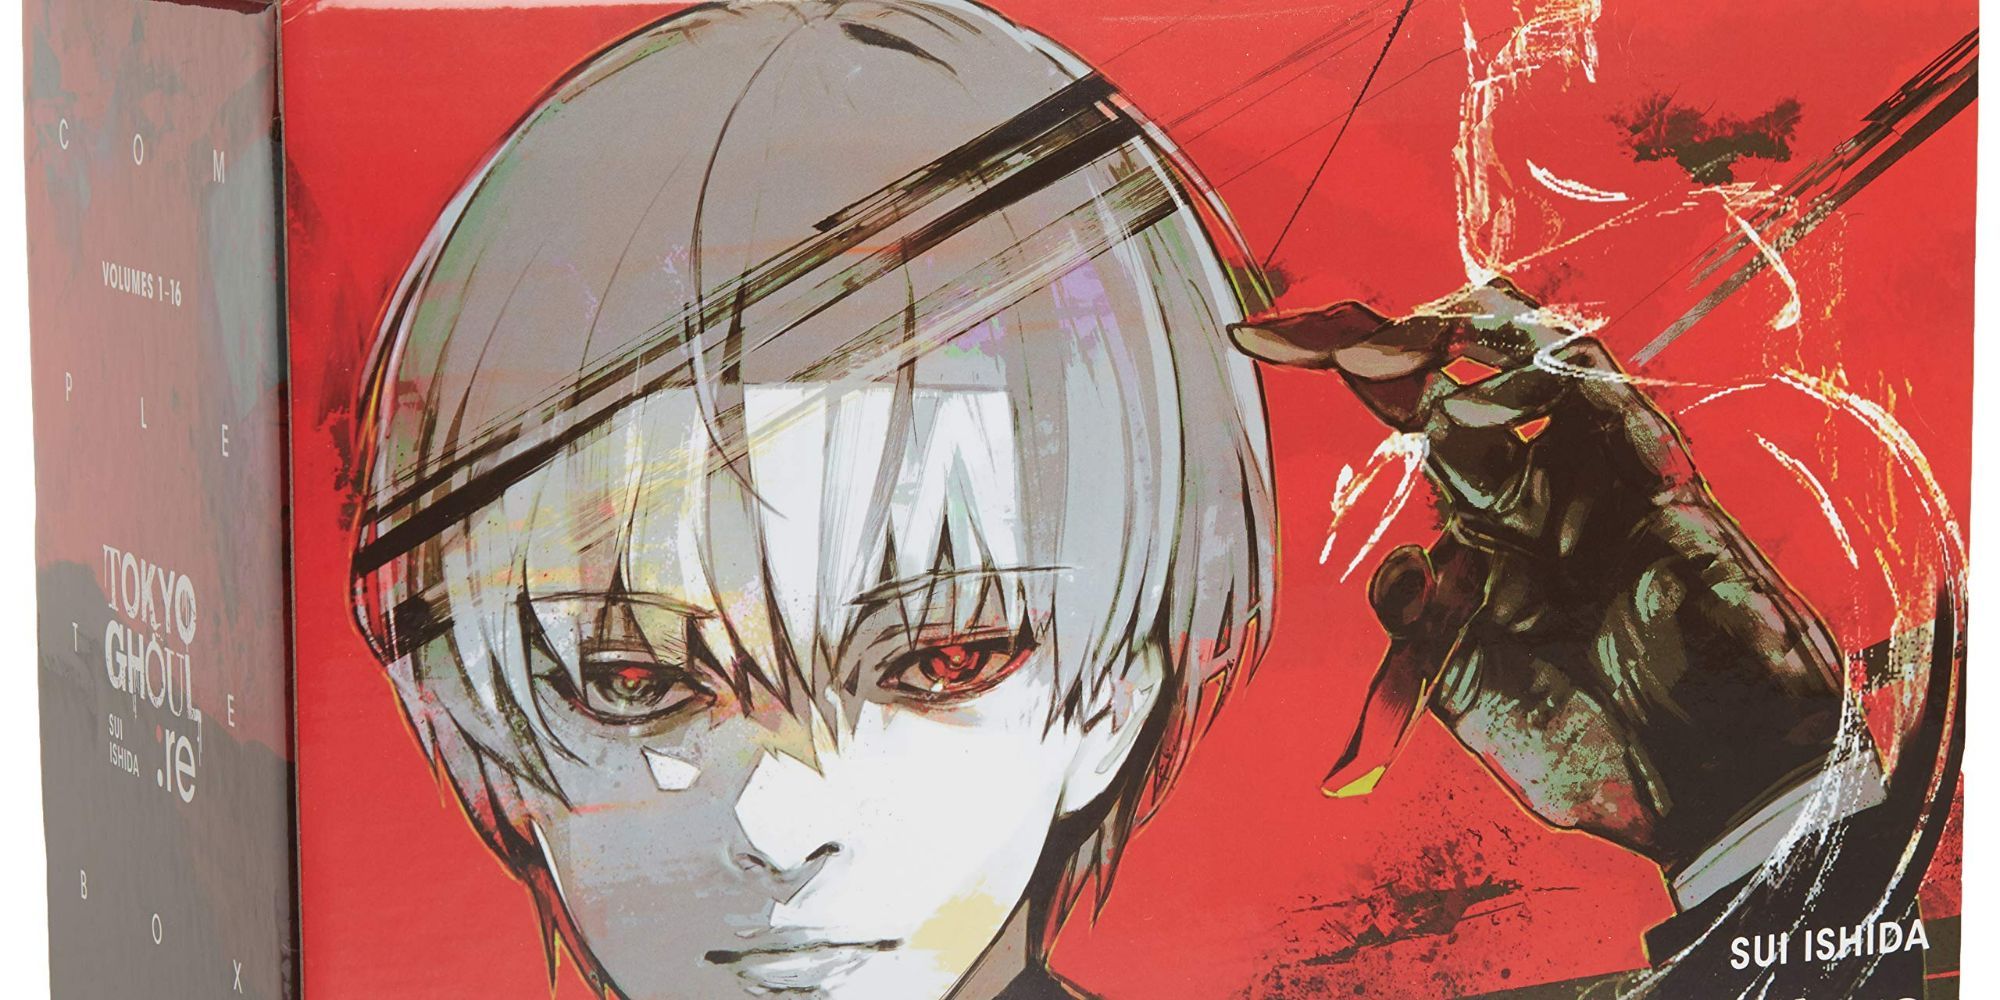 Ken Kaneki with upraised hand on the cover of Tokyo Ghoul